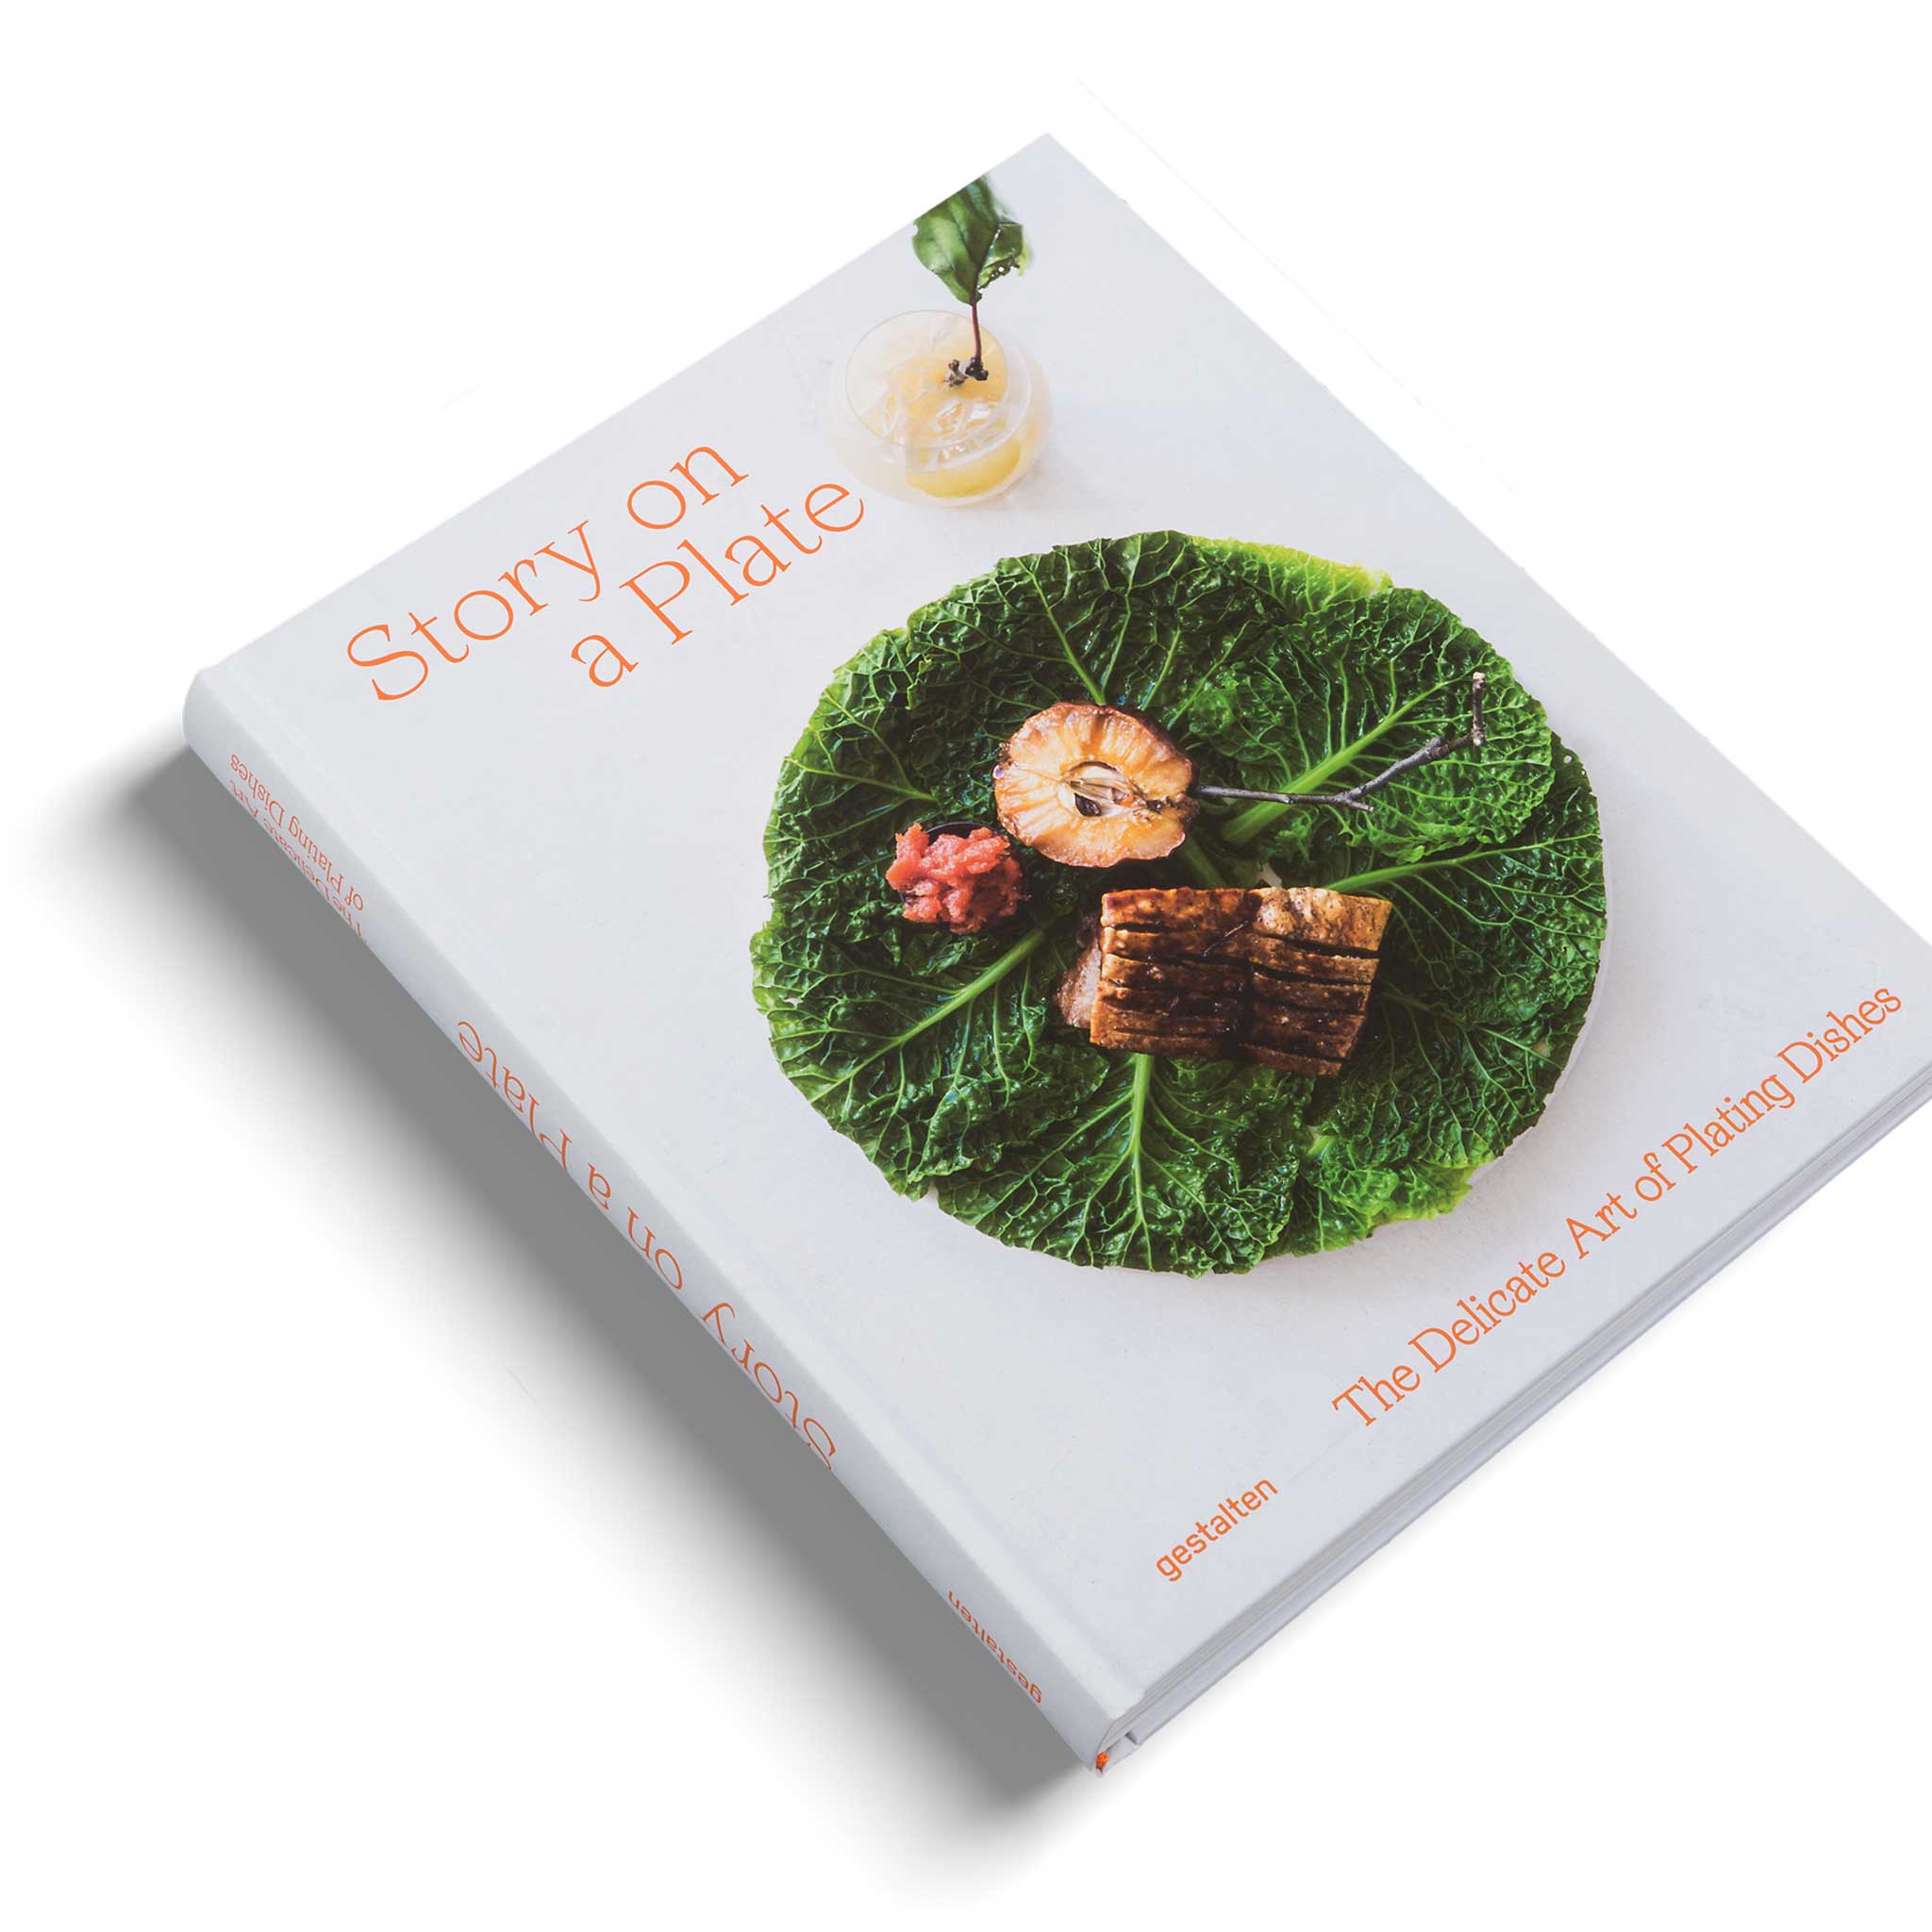 STORY ON A PLATE | The delicate art of plating dishes | BUCH | Gestalten Verlag - Charles & Marie